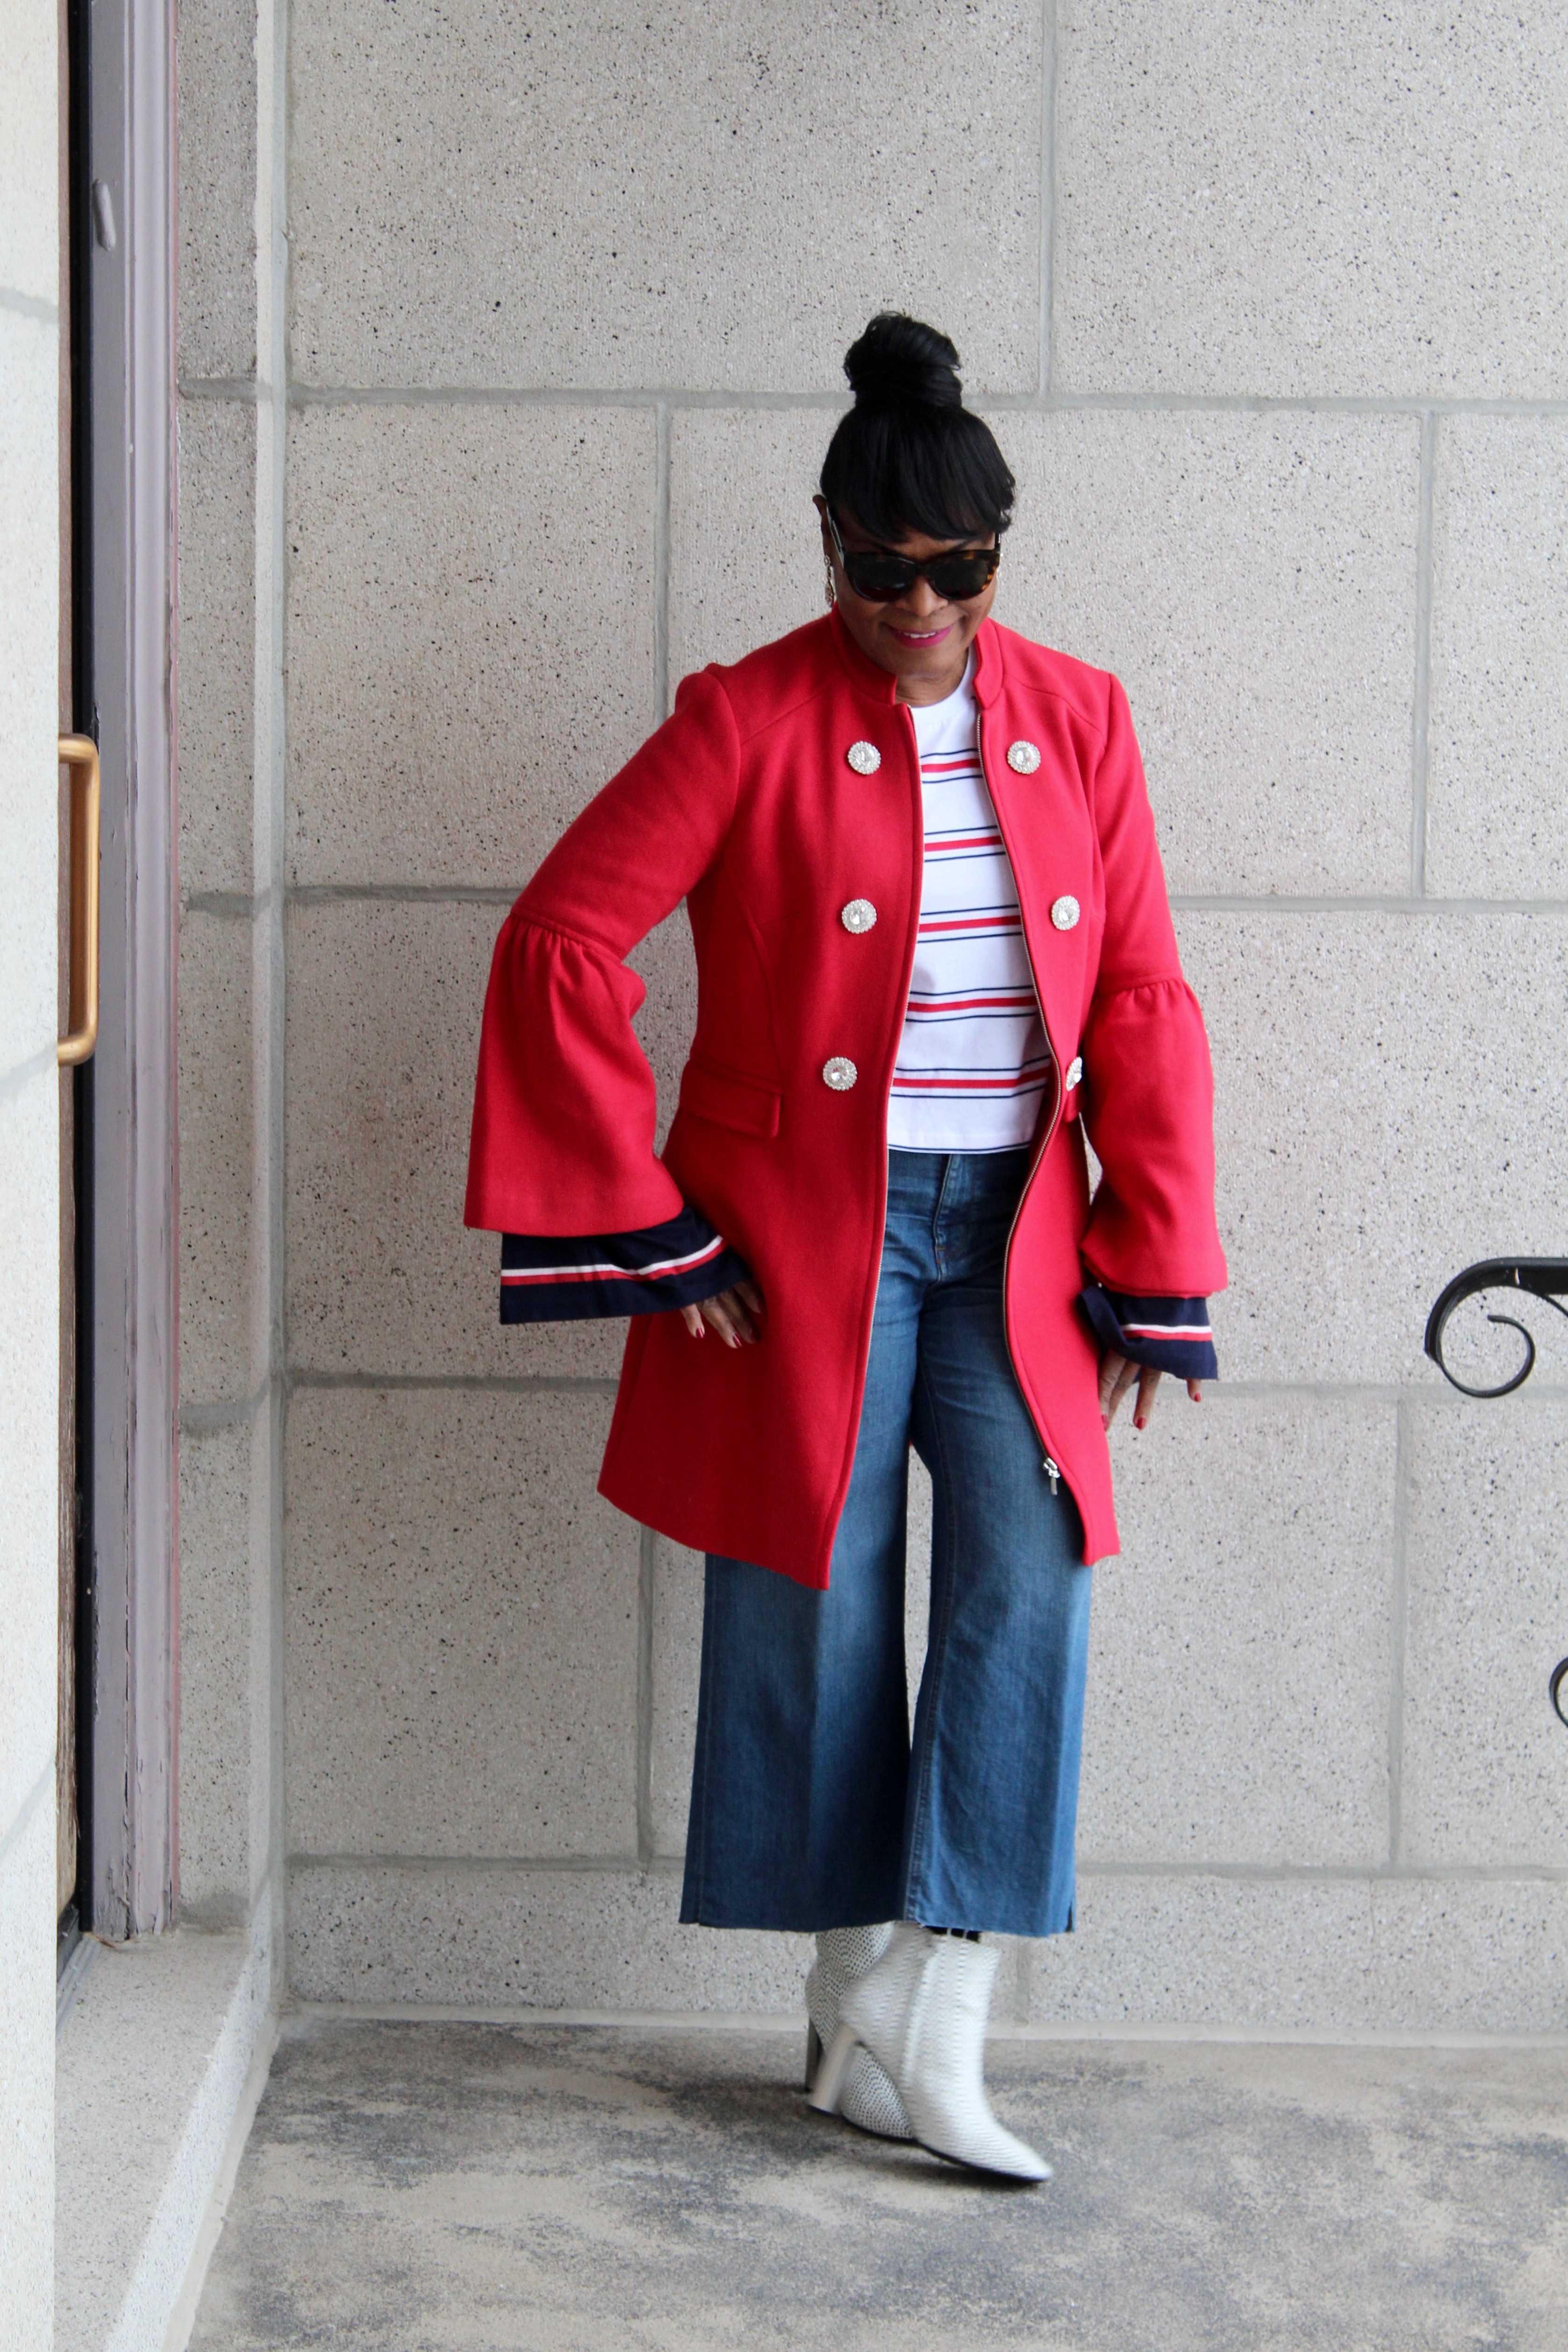 Do You Know the Health of Your Heart; INC Red Ponte Bell Sleeve Coat; White Booties; ASOS Oversized Bell Sleeves